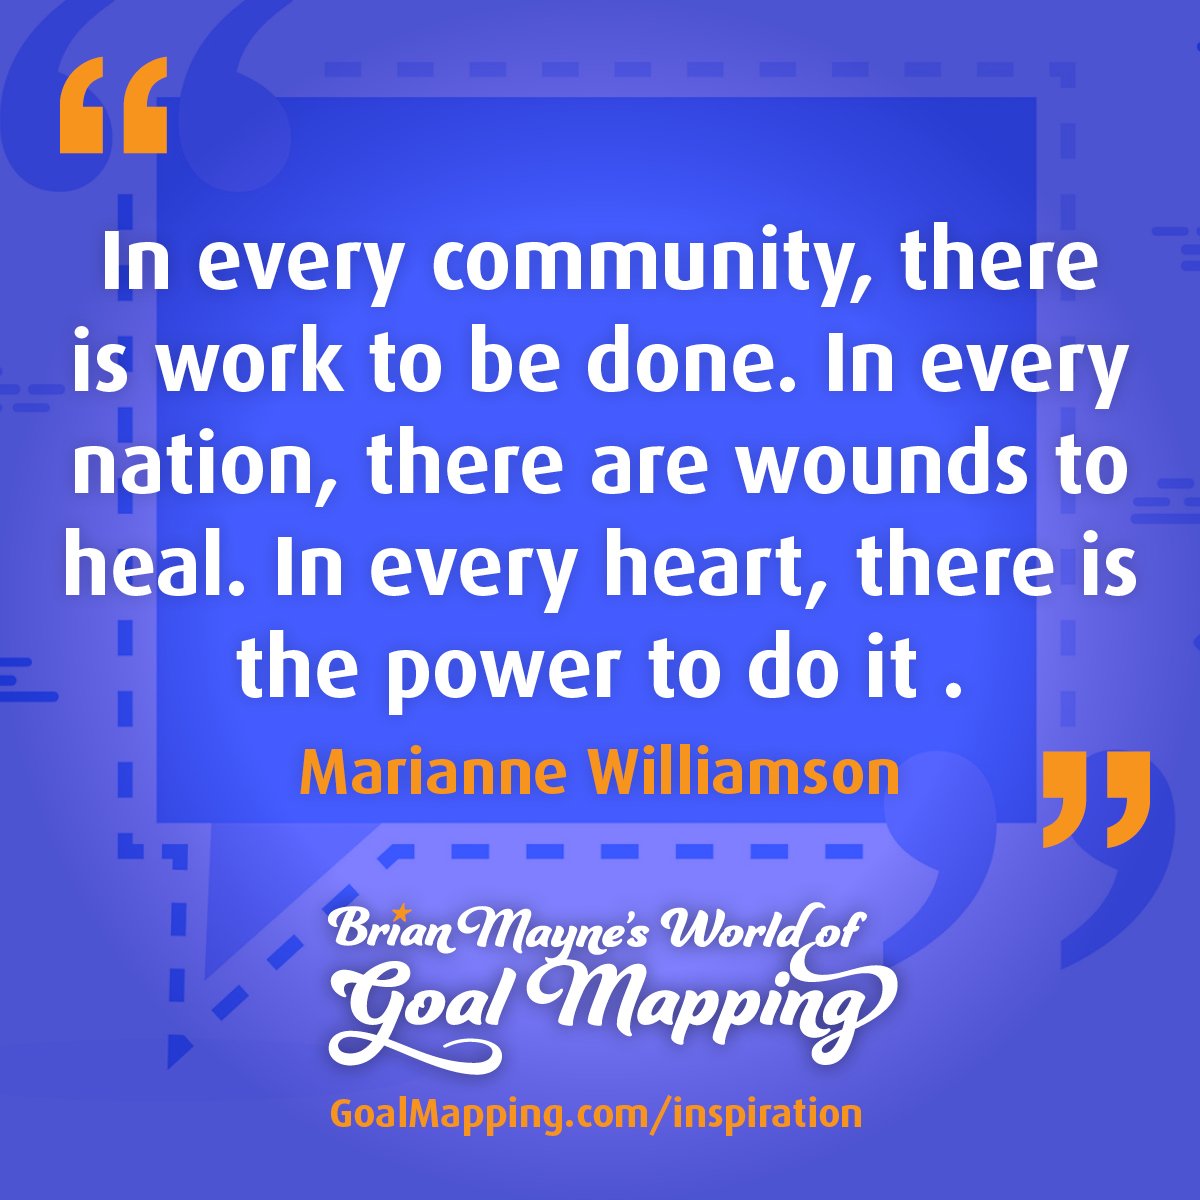 "In every community, there is work to be done. In every nation, there are wounds to heal. In every heart, there is the power to do it ." Marianne Williamson